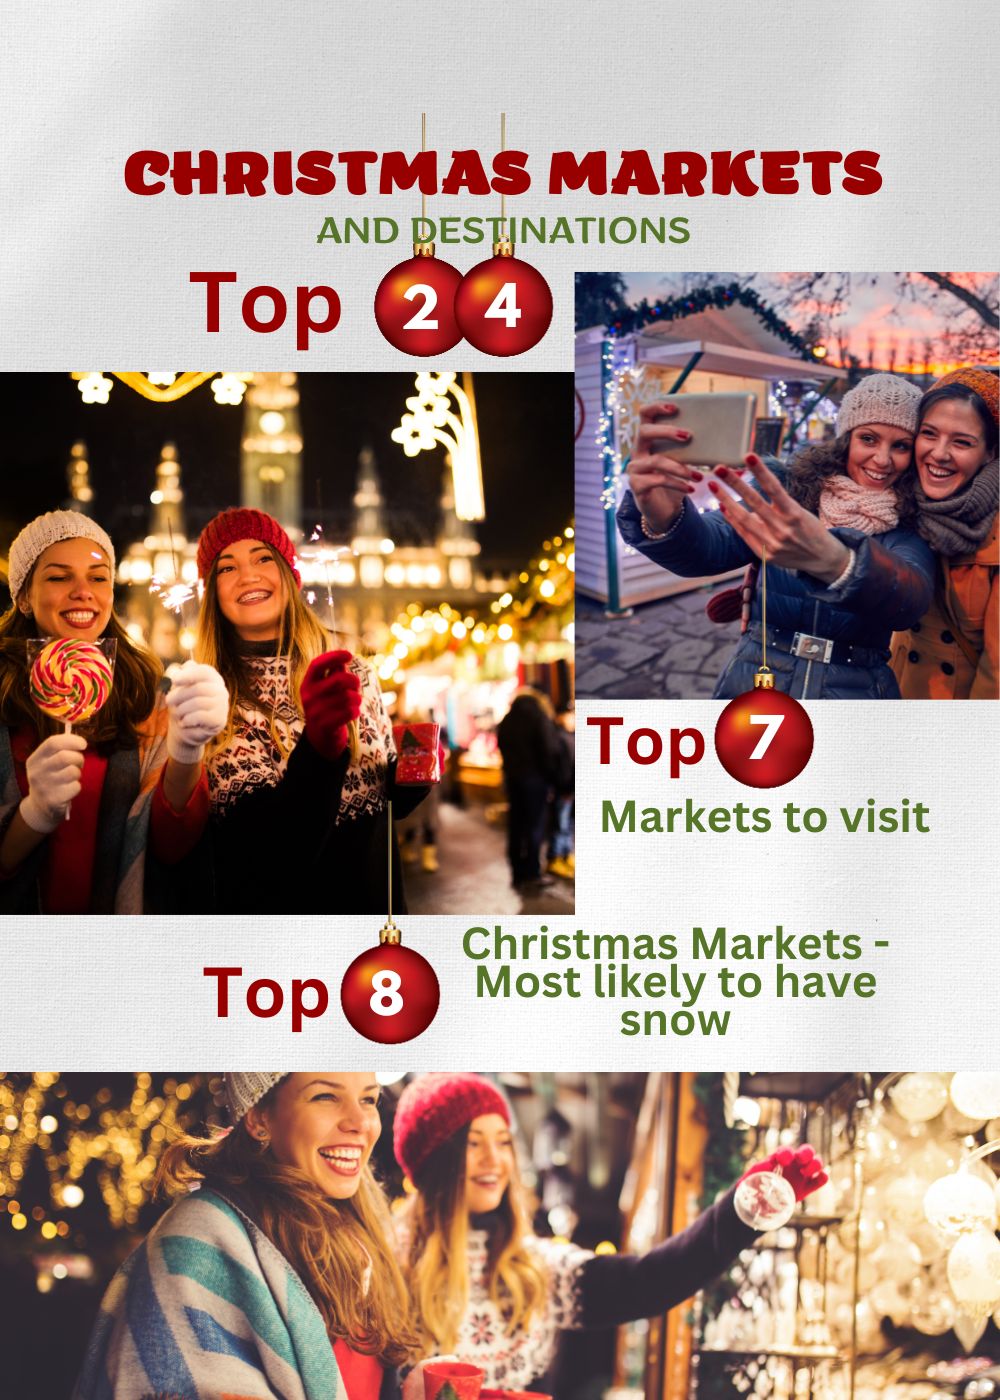 Top Christmas Markets Top Christmas Markets to visit Christmas markets that have snow